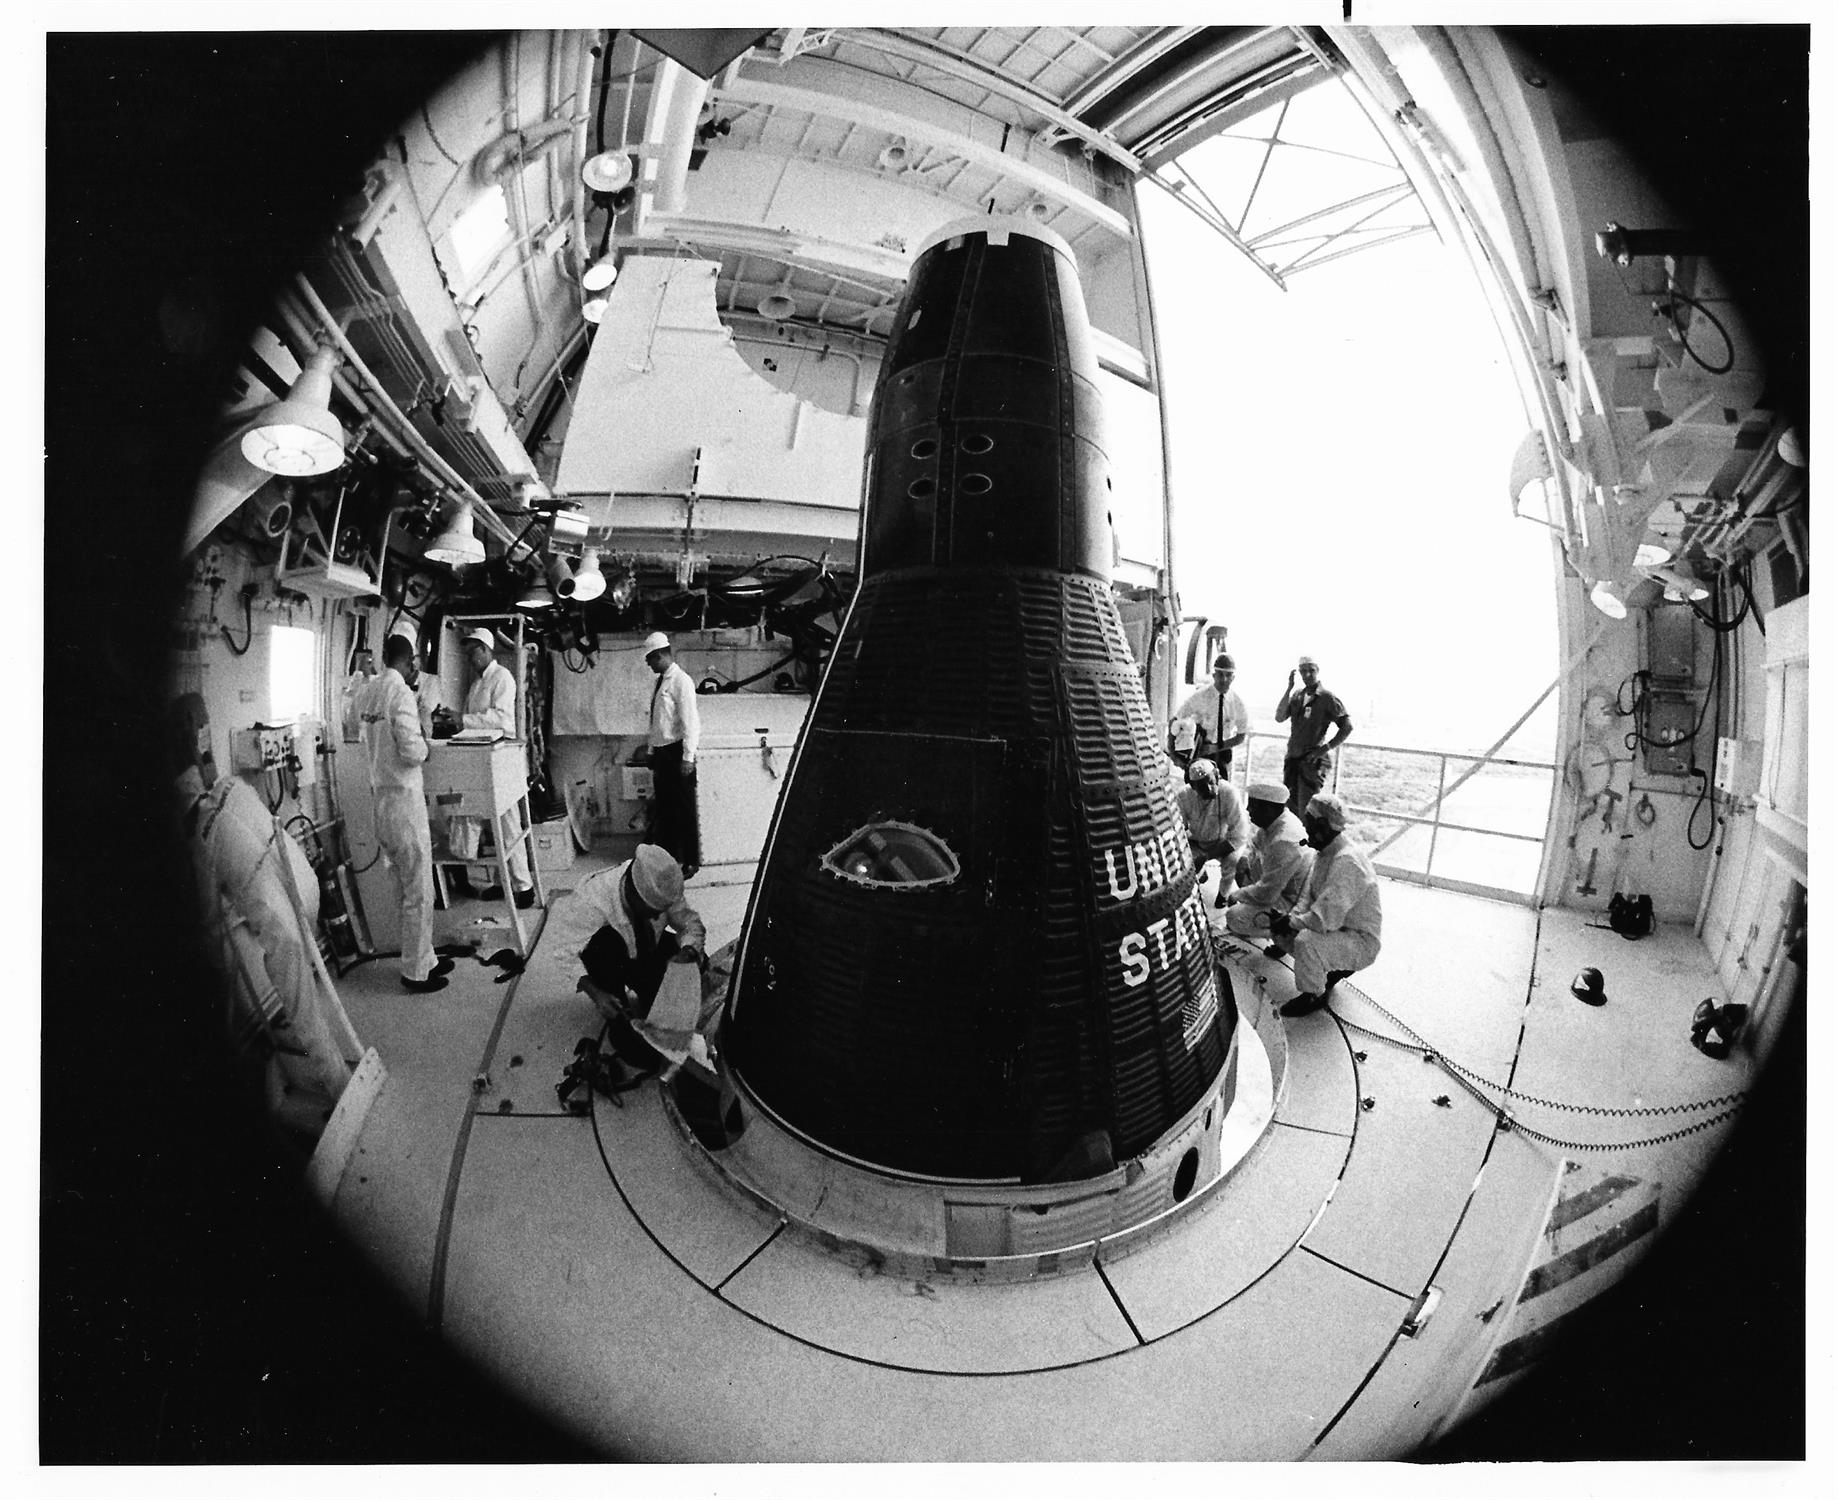 Pre-flight prepartions during final moments before the launch [five views], Gemini 9A, June 1966 - Image 10 of 11